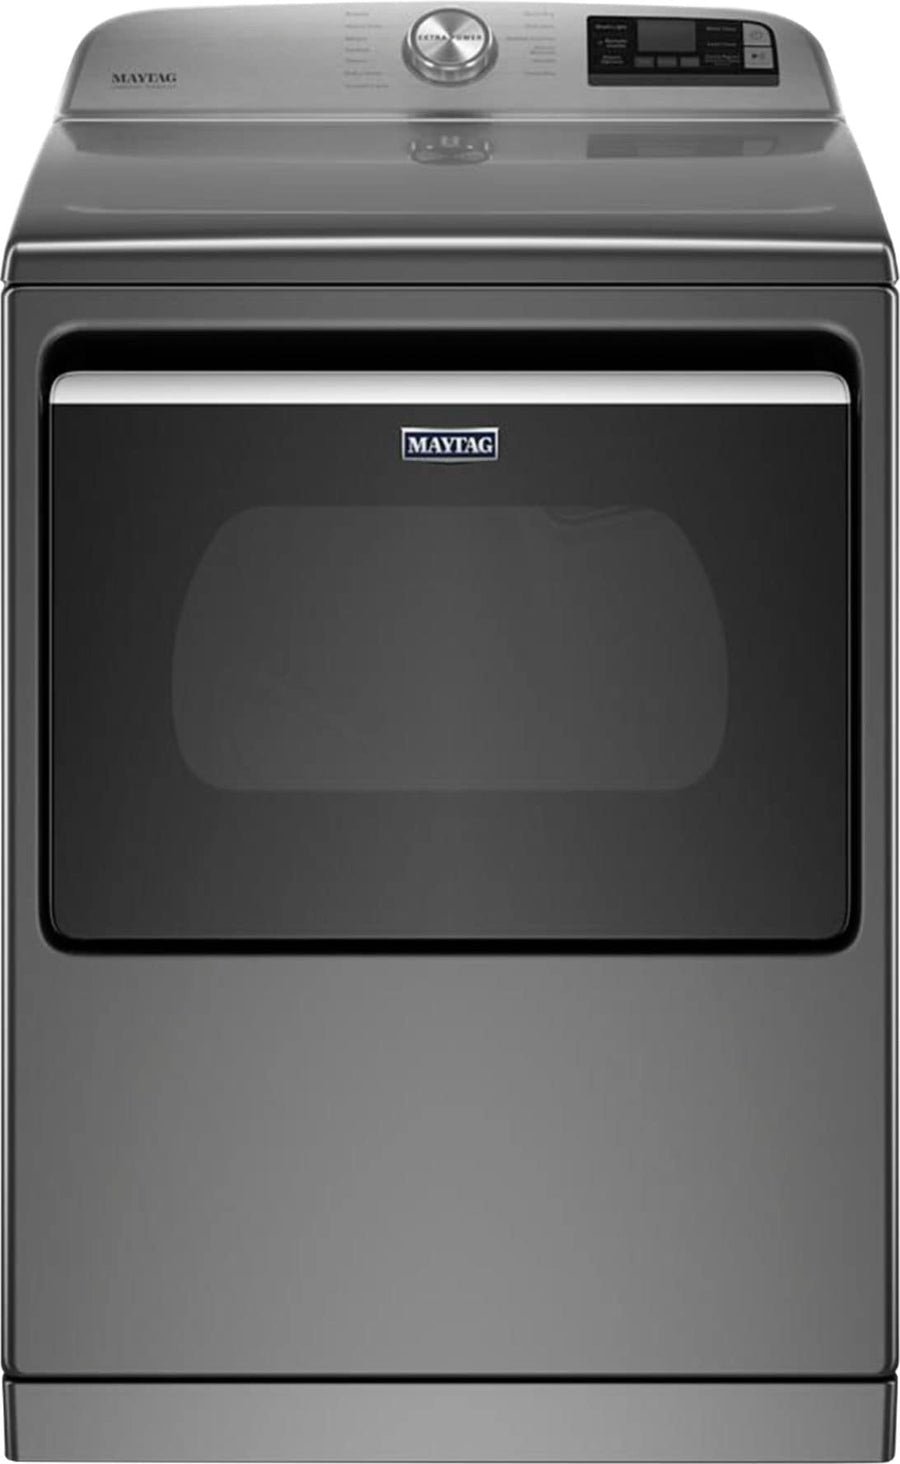 Maytag - 7.4 Cu. Ft. Smart Electric Dryer with Steam and Extra Power Button - Metallic slate_0